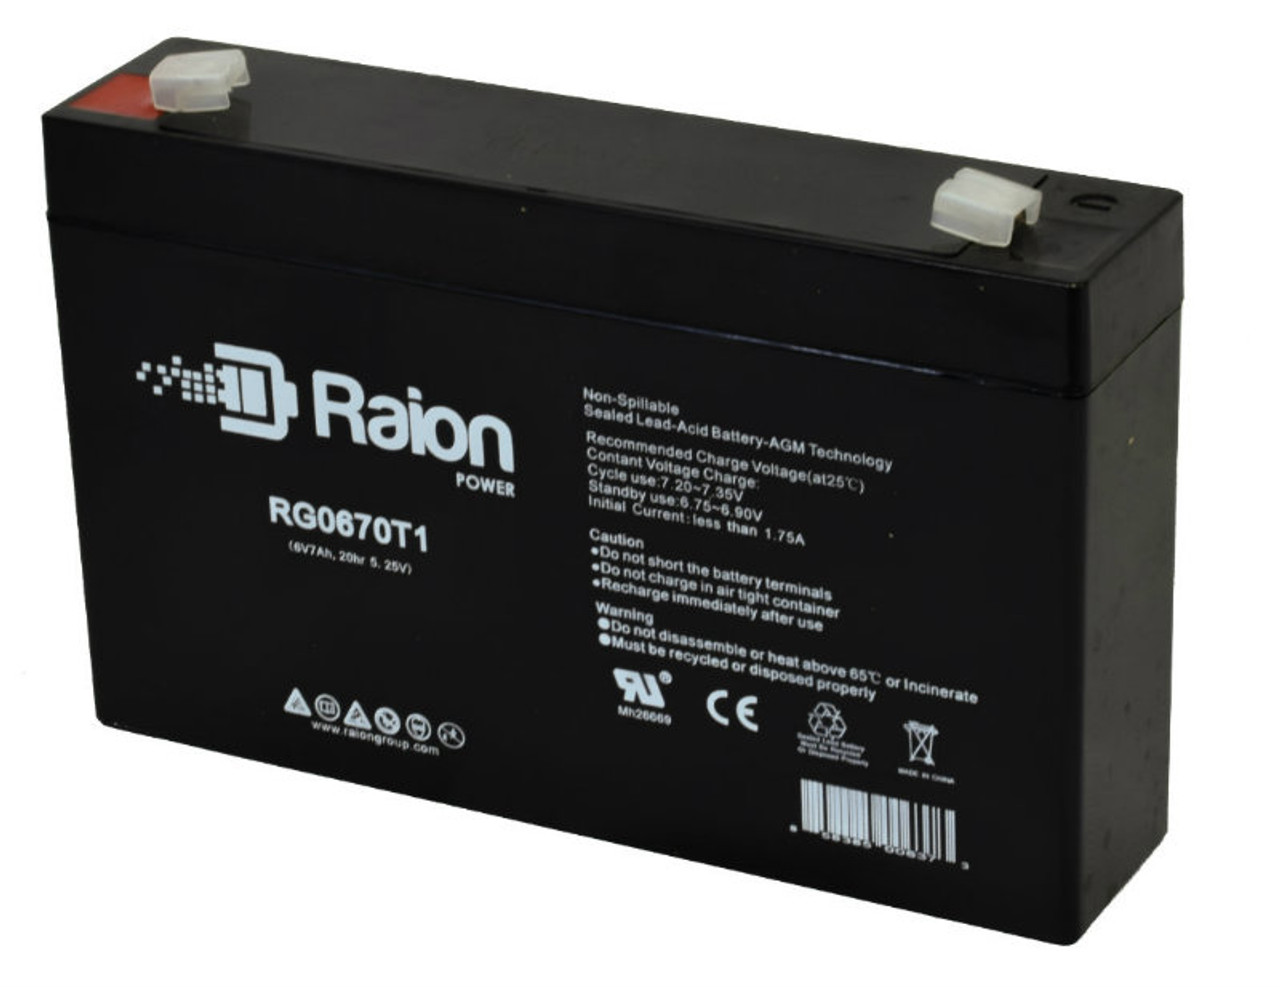 Raion Power RG0670T1 6V 7Ah Replacement Emergency Lighting Battery for Lithonia EL0607